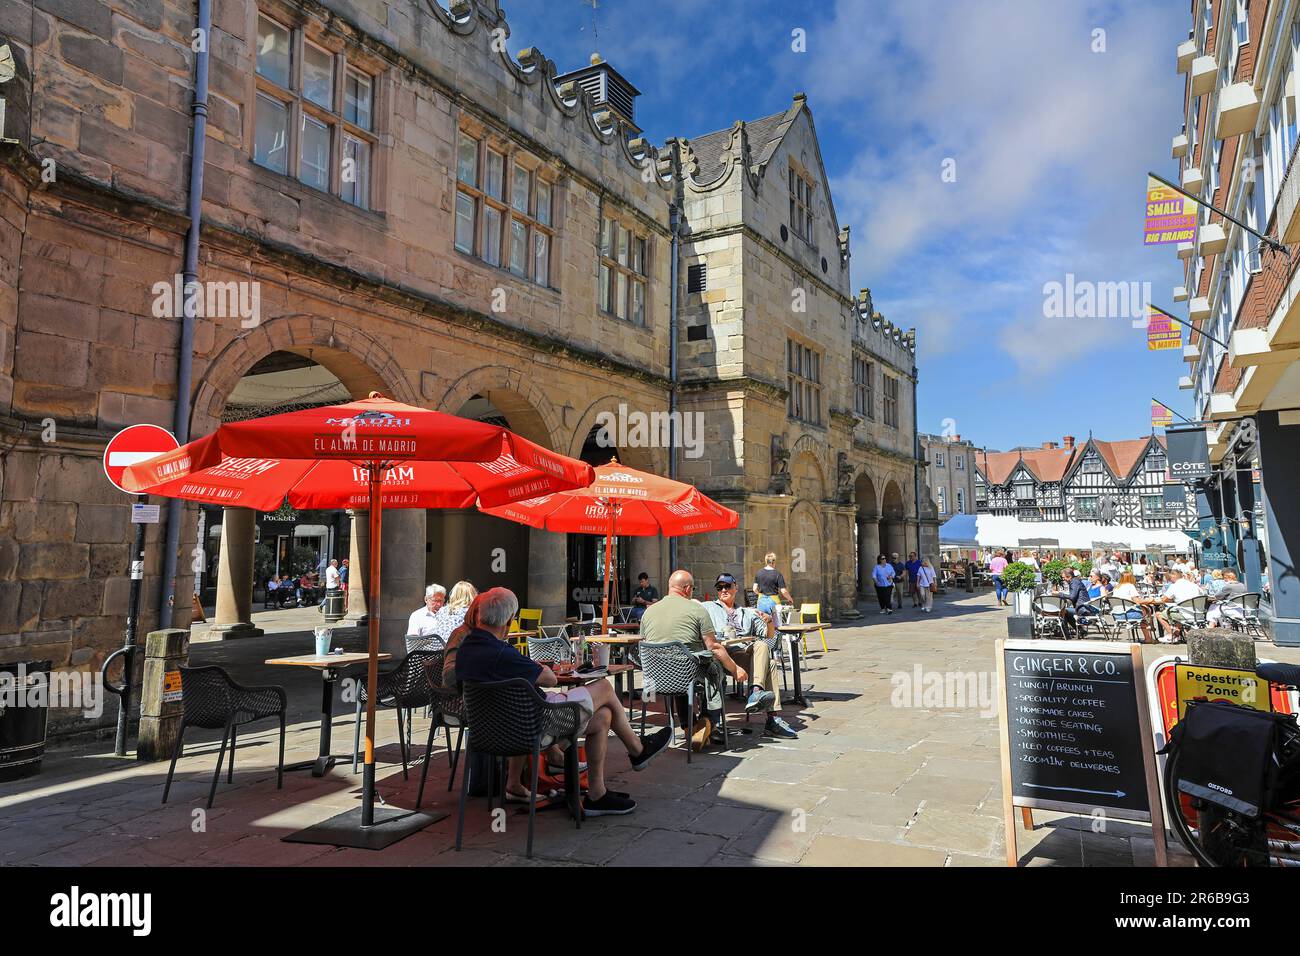 People sitting eating and drinking outside the Old Market Hall in the Town centre, Shrewsbury, Shropshire, England, UK Stock Photo